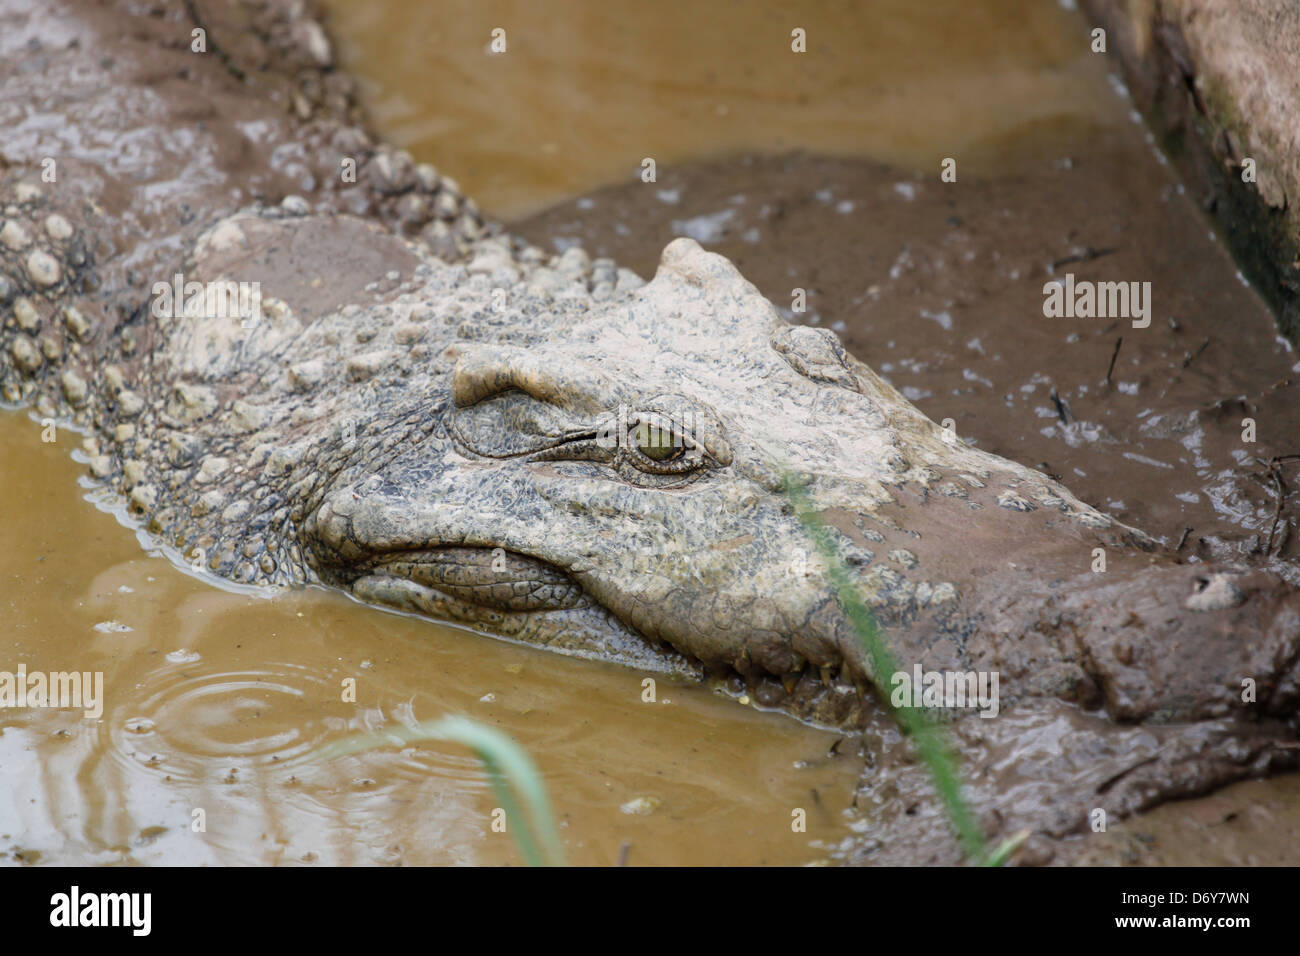 The Crocodile Relaxation in hot days. Stock Photo